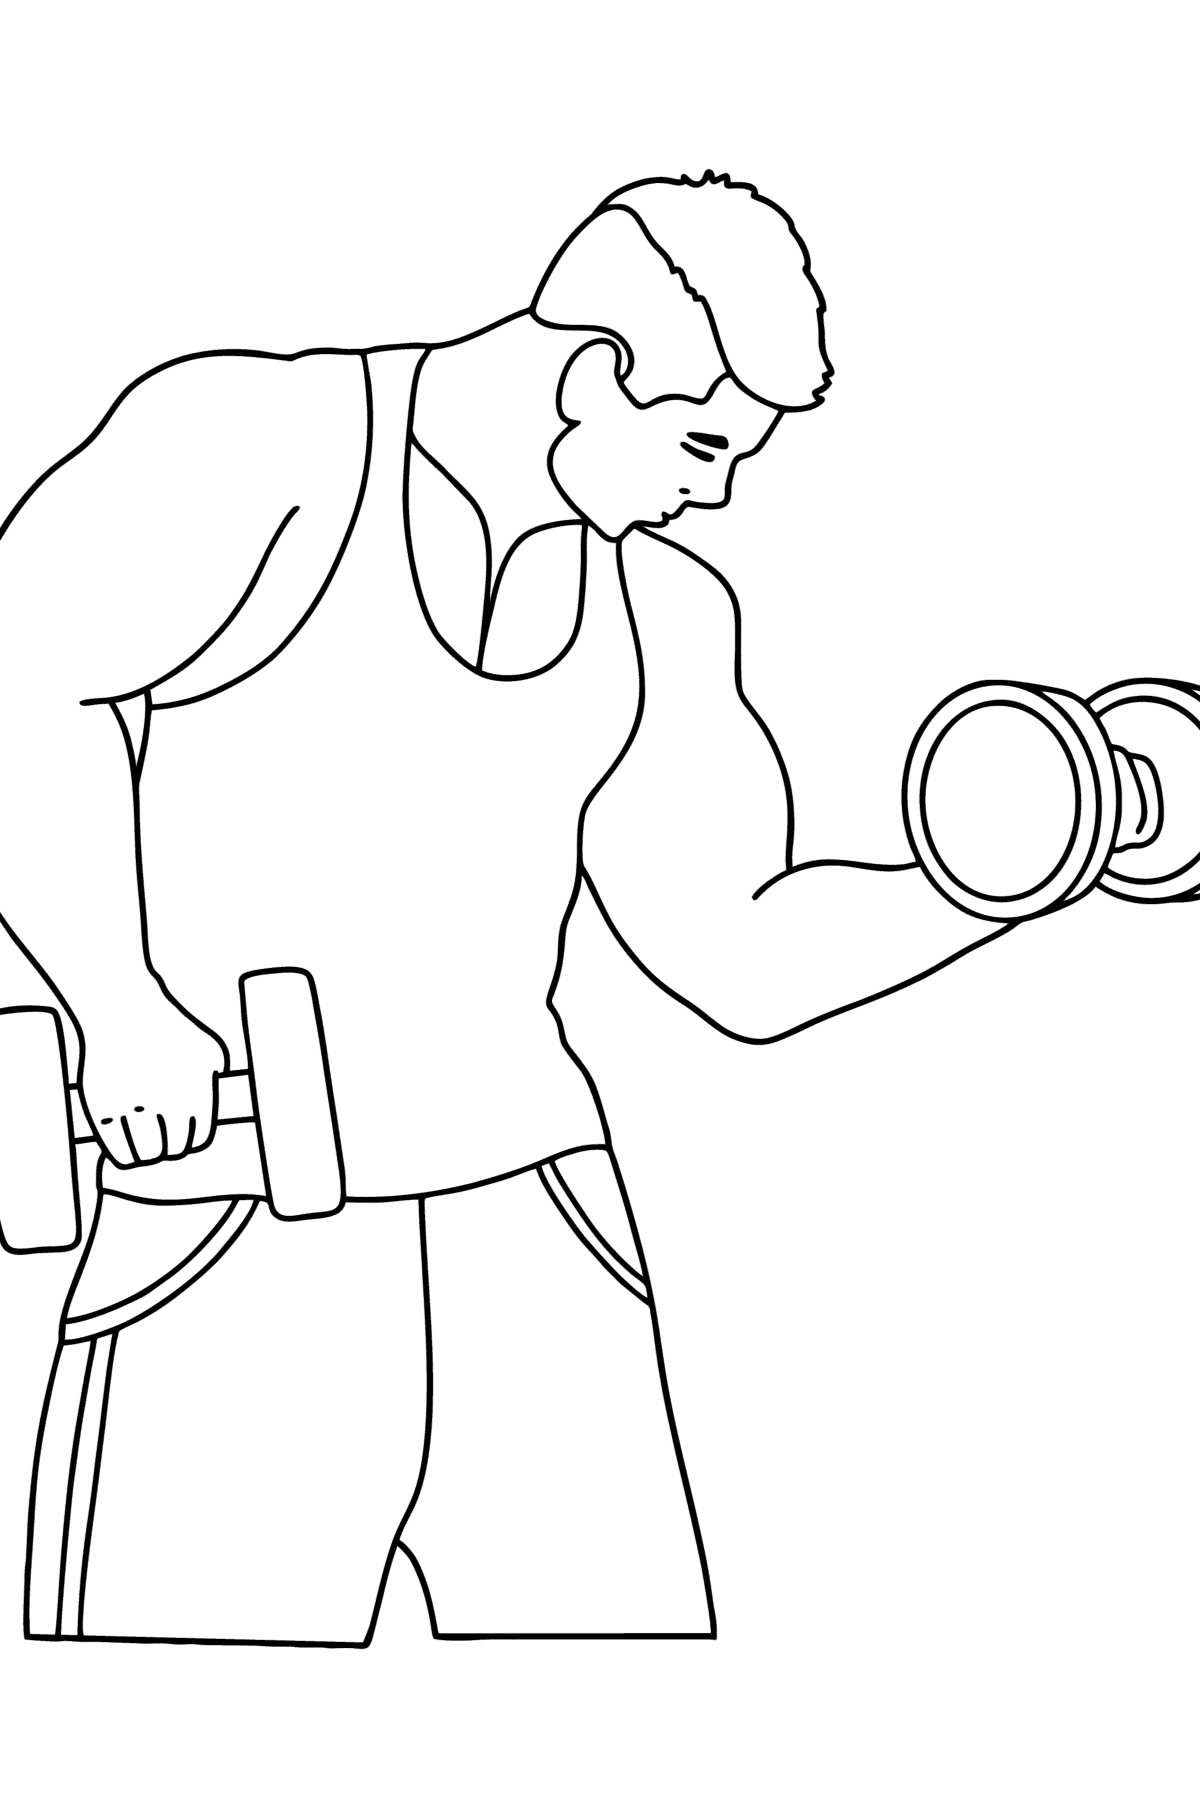 Man in the gym сoloring page - Coloring Pages for Kids